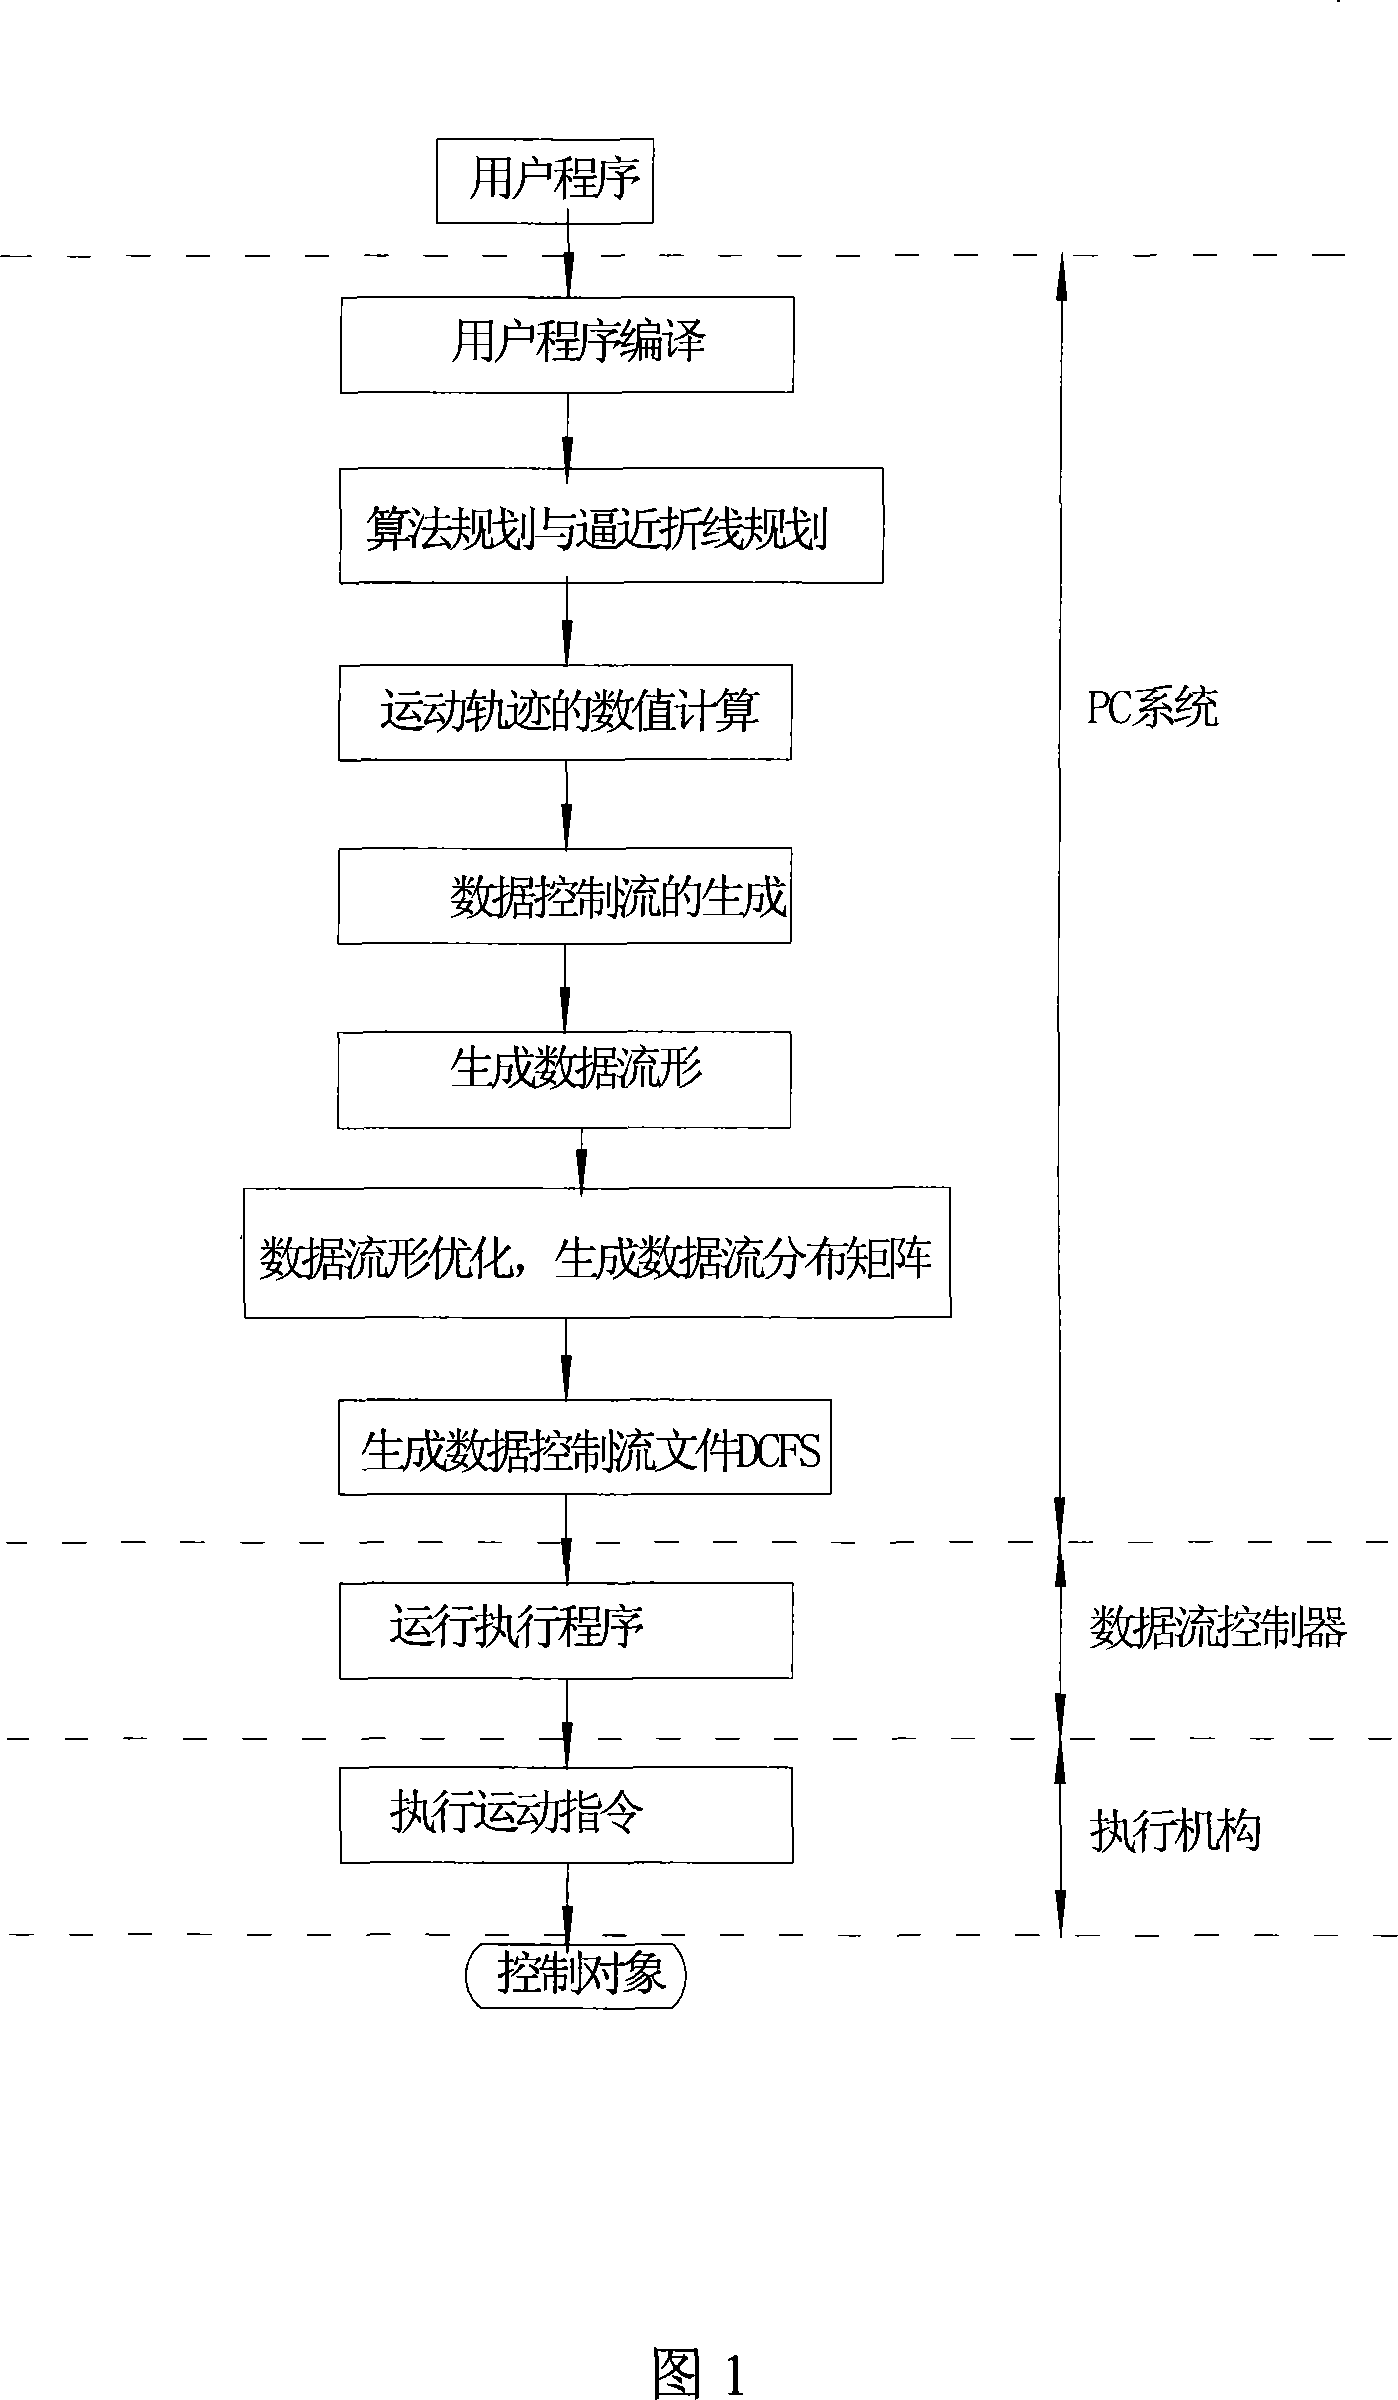 Data stream relating control method and architecture of computer digital control system